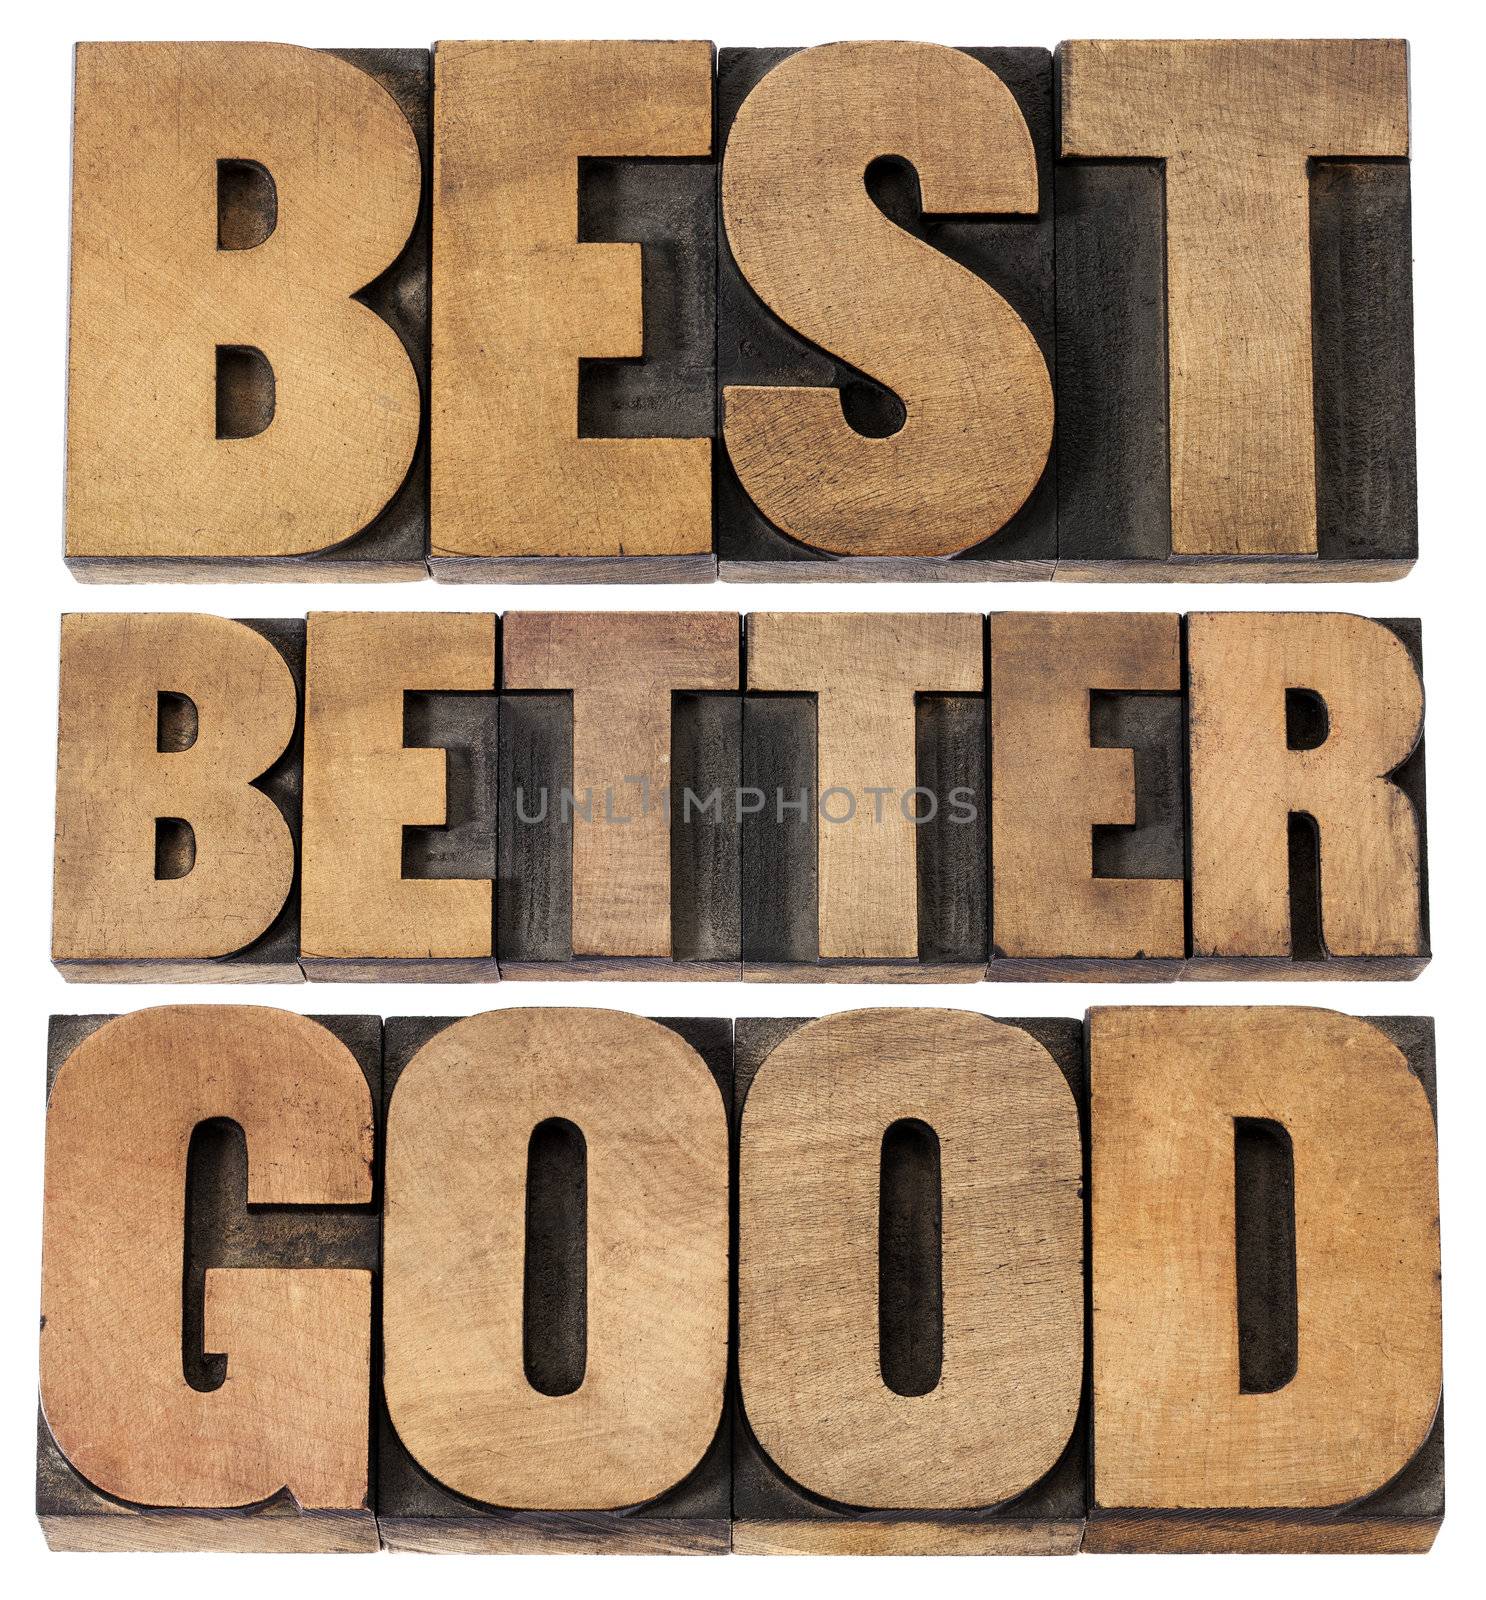 good, better, best - a collage of isolated words in vintage letterpress wood type scaled to a rectangular shape